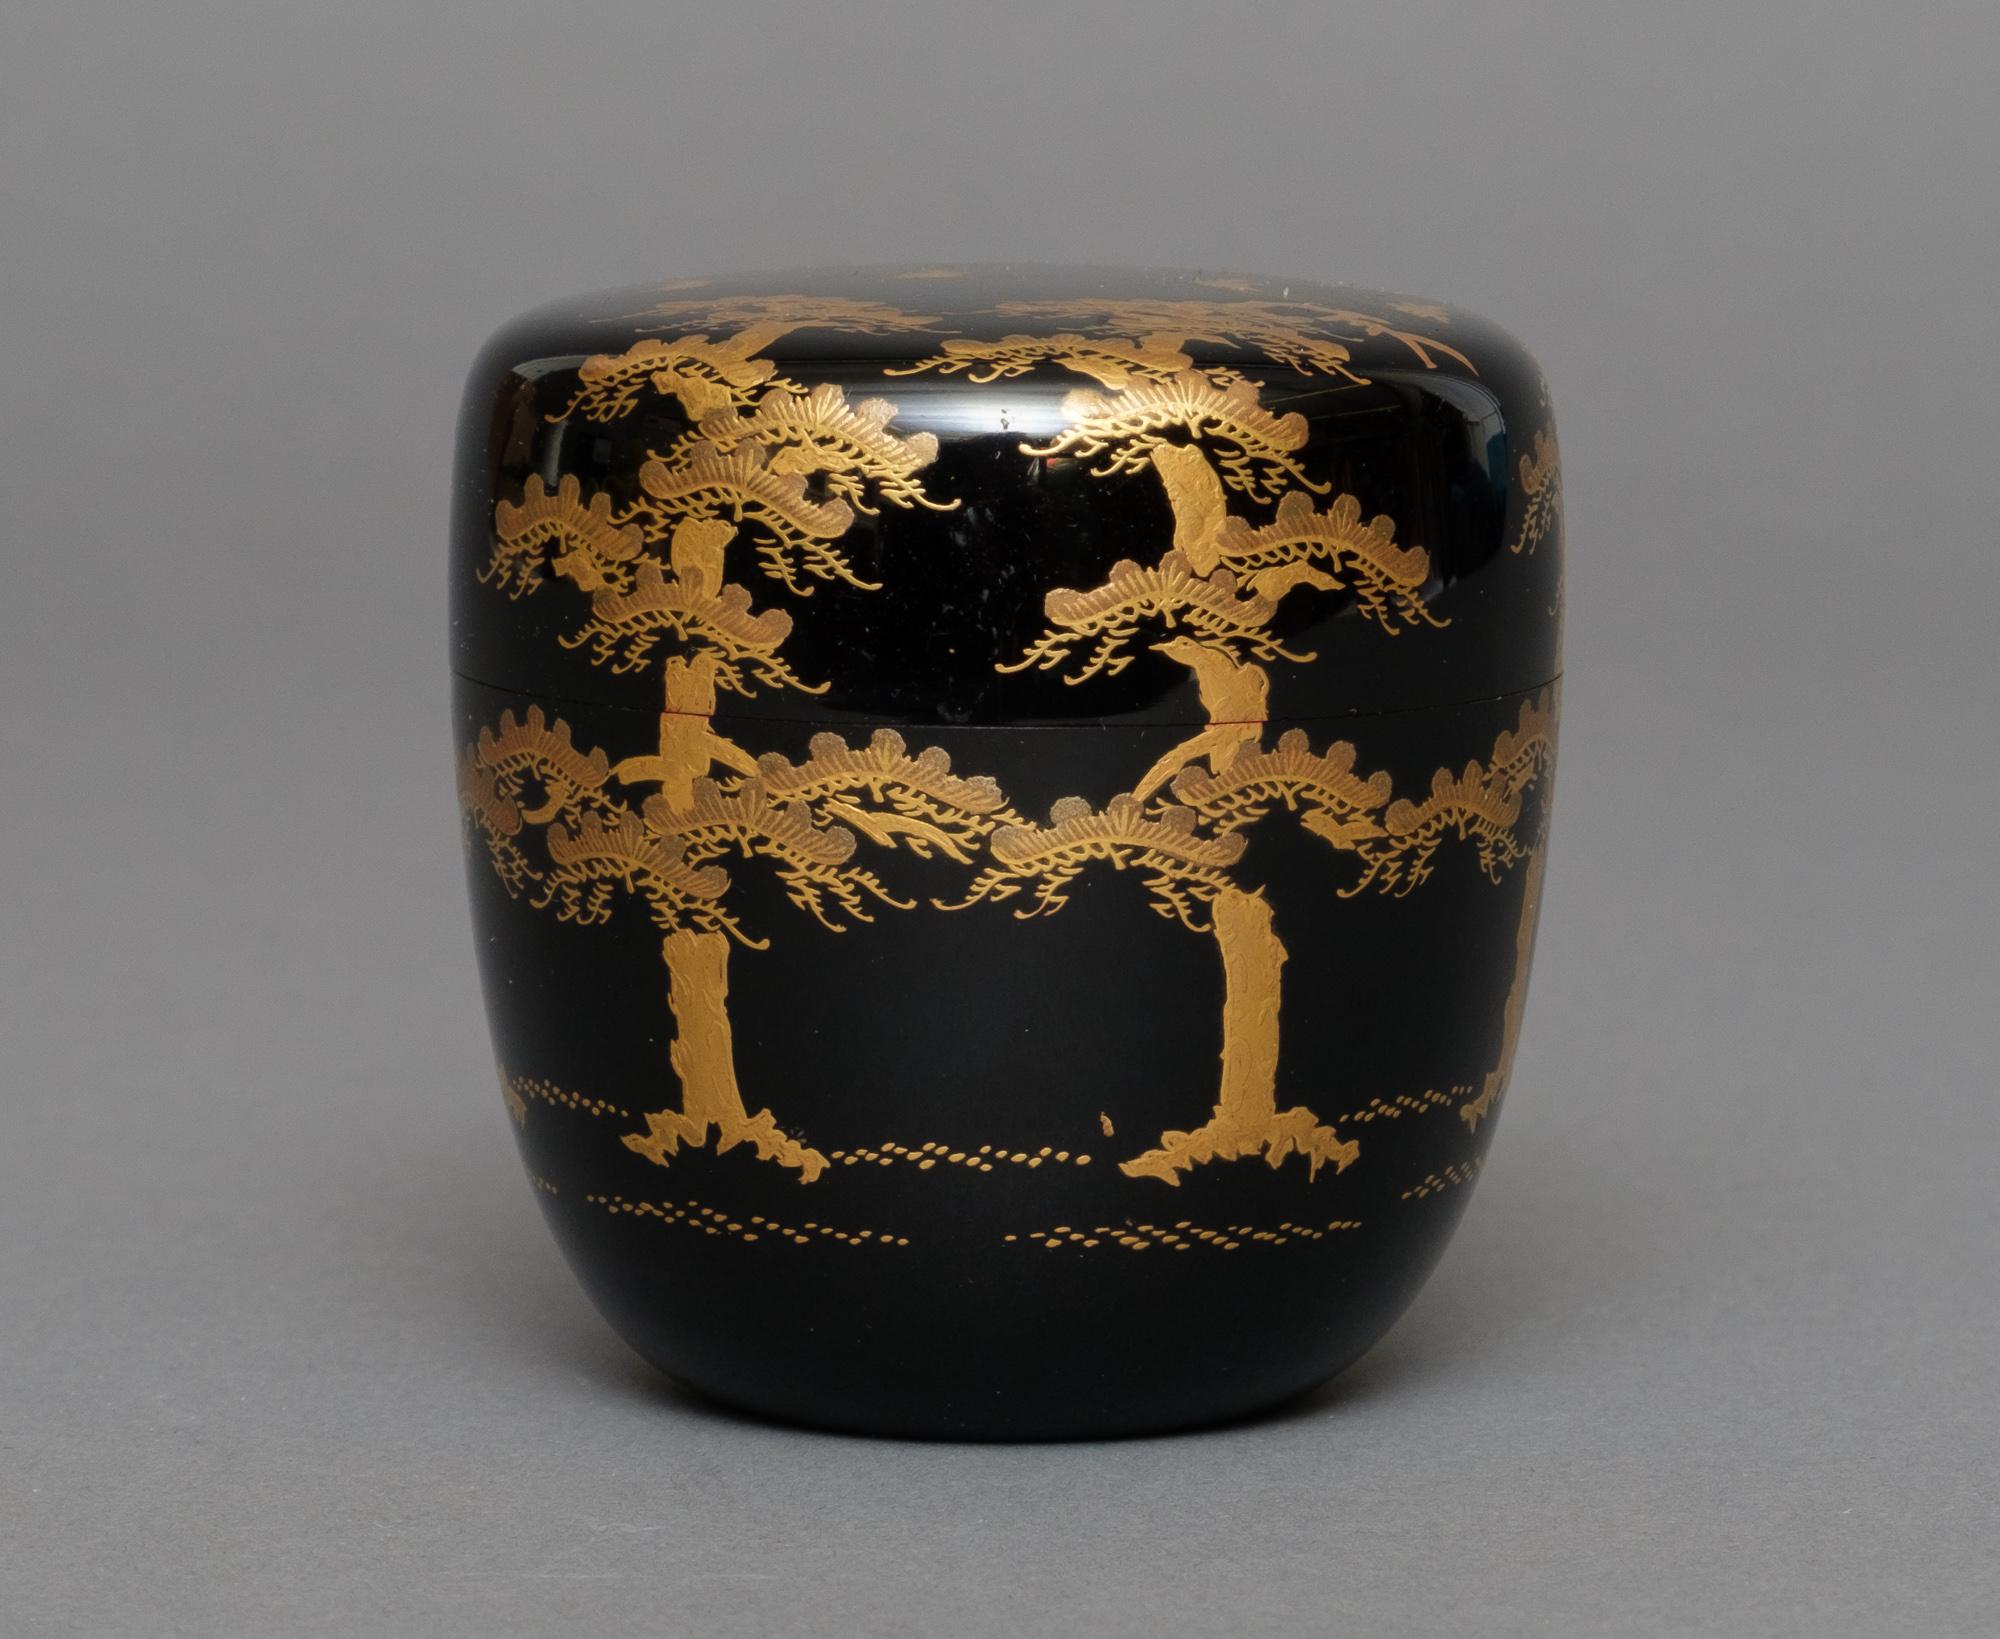 Lacquer Japanese lacquer tea caddy 棗 (natsume) showcasing a pine tree forest For Sale